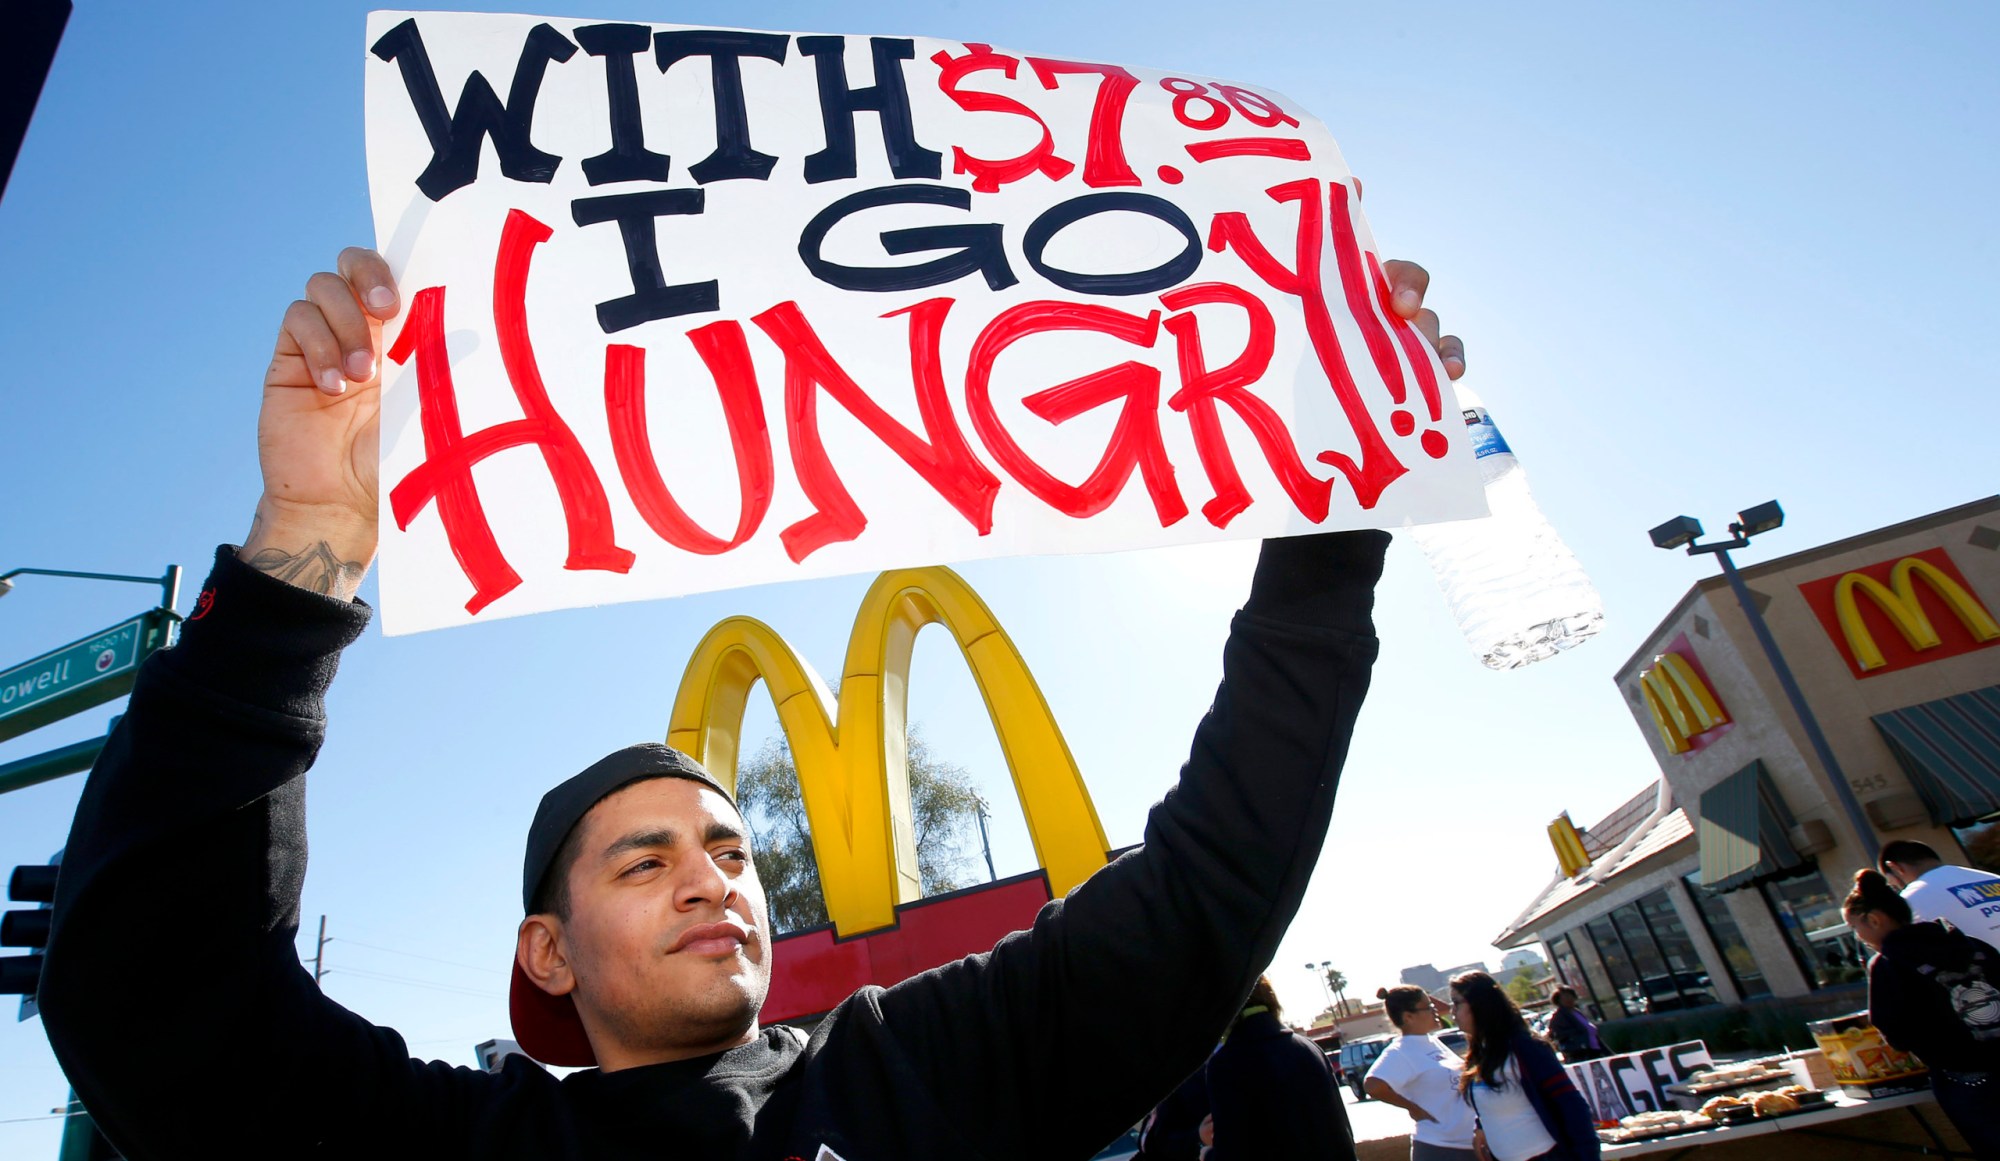 Alex Robles joins dozens of sign-holding protesters at a rally against low wages in front of a McDonald's in December 2013. (AP/Ross D. Franklin)